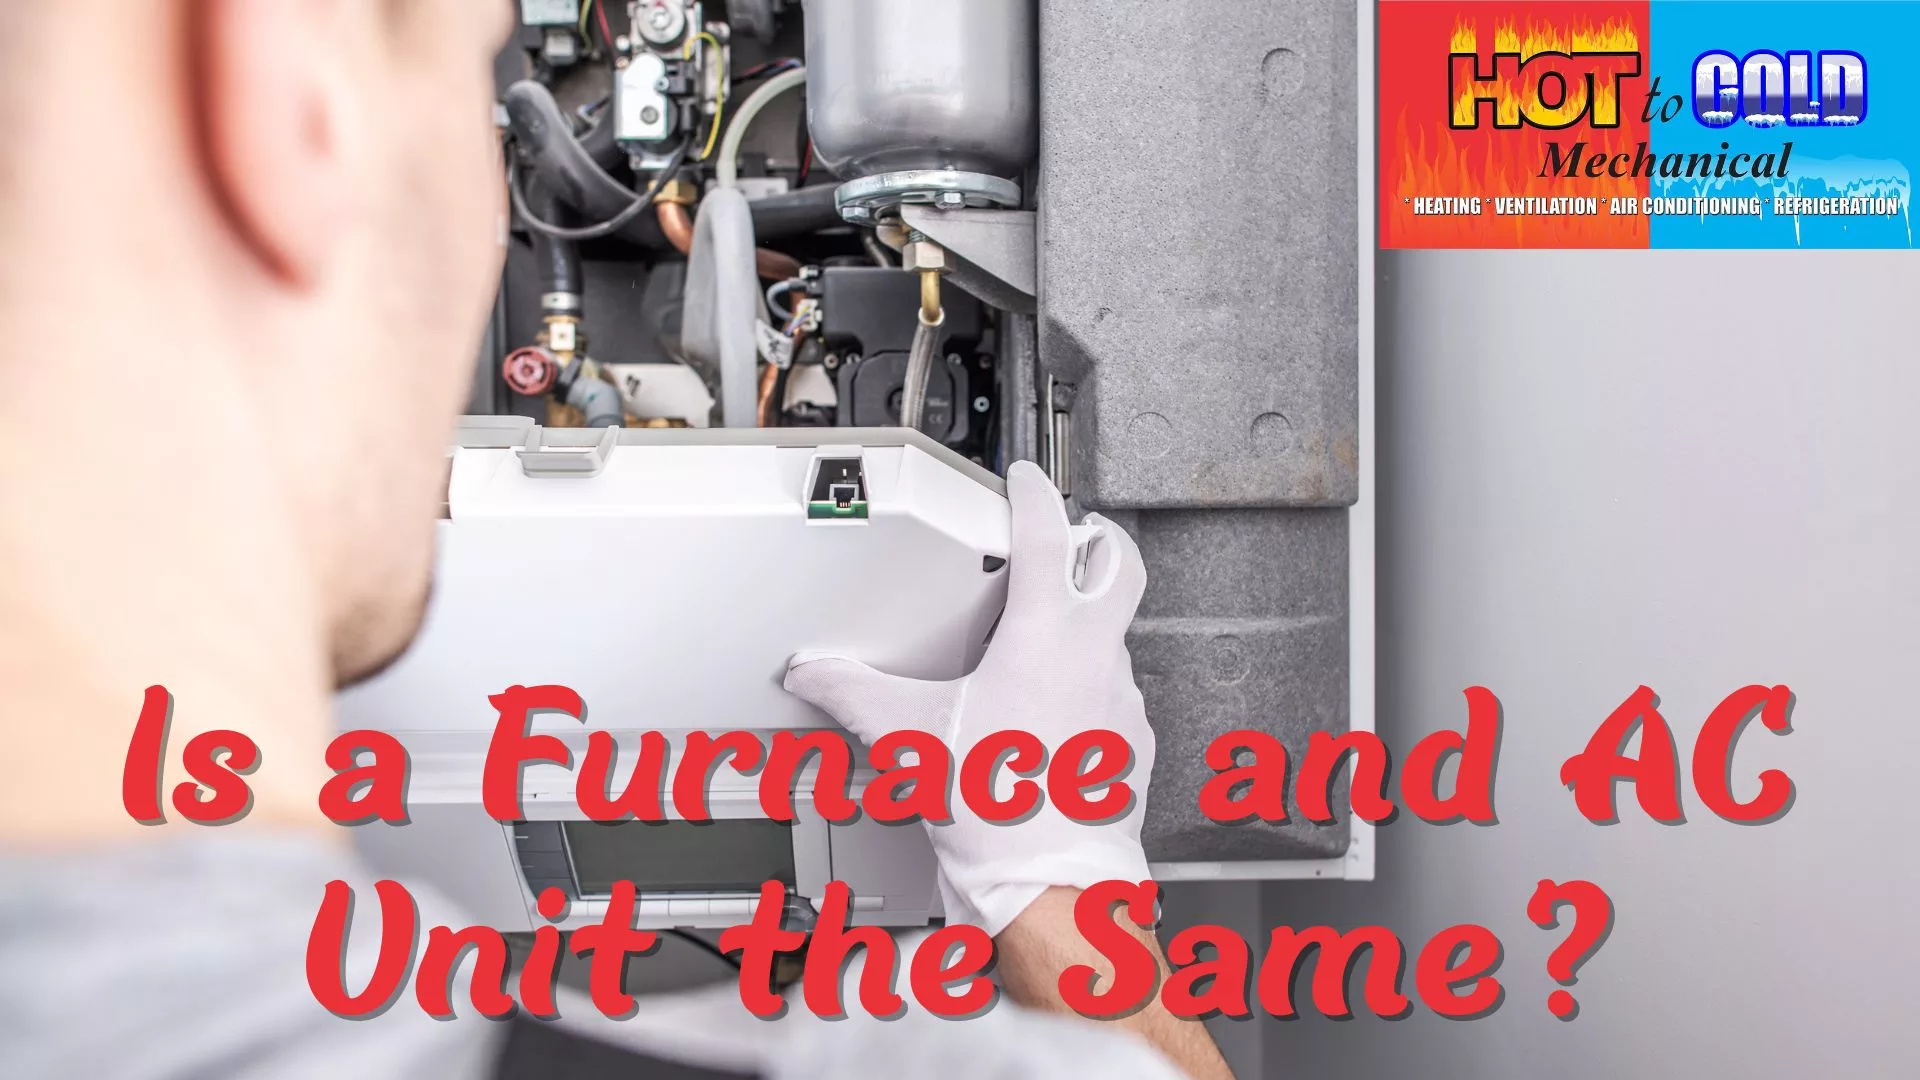 Is a Furnace and AC Unit the Same? by Hot To Cold